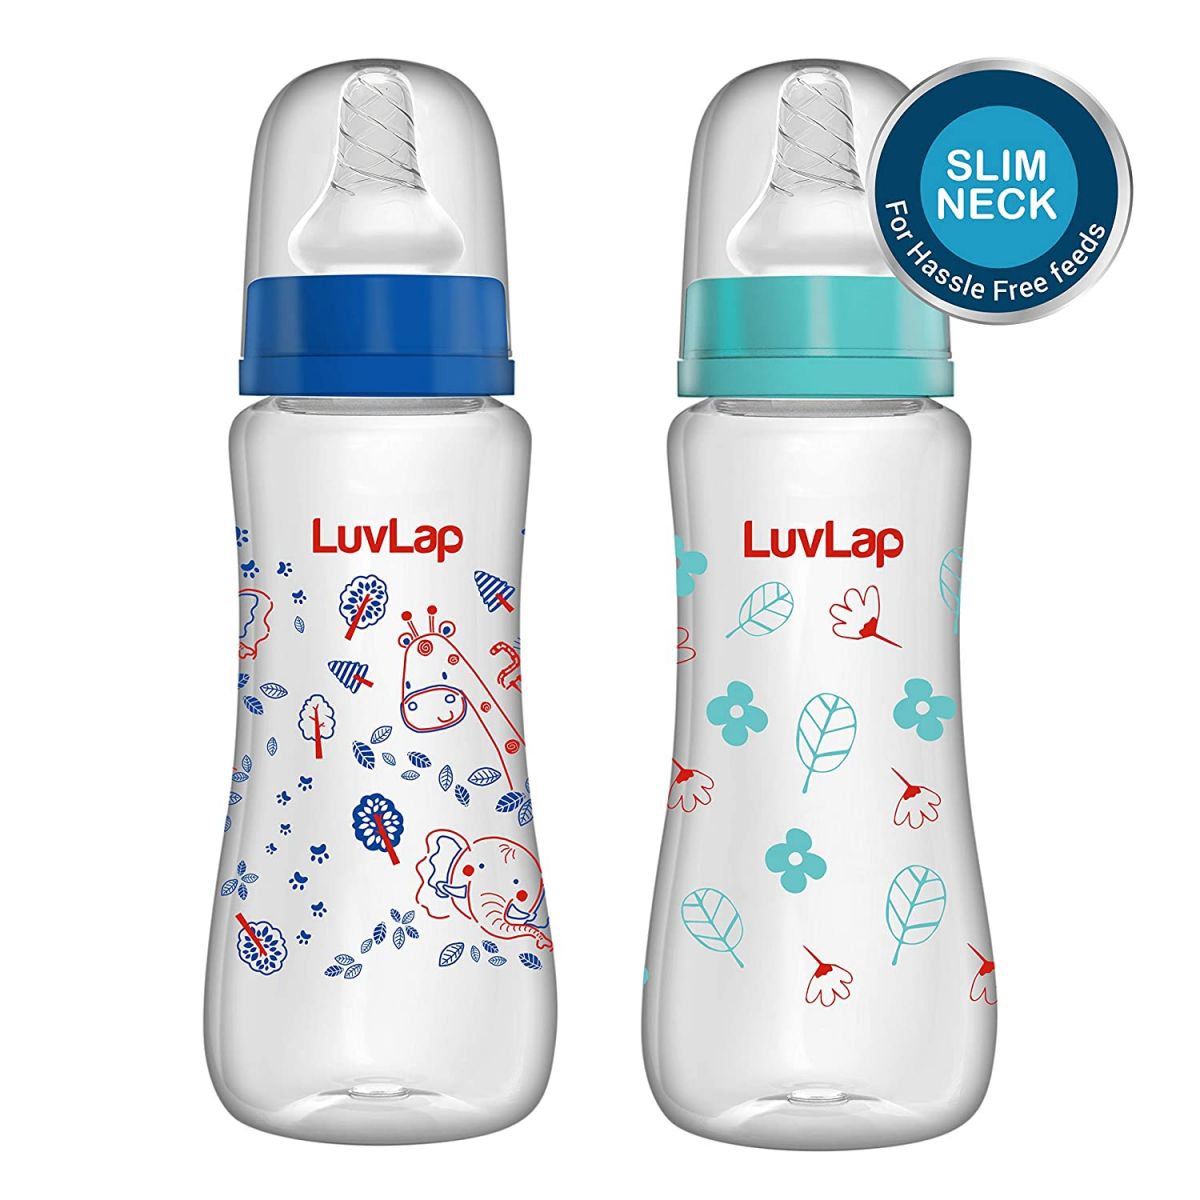 Picture of LuvLap Ess S Neck F Botl, 250ml, Pack of 2, Flower/ Jungle